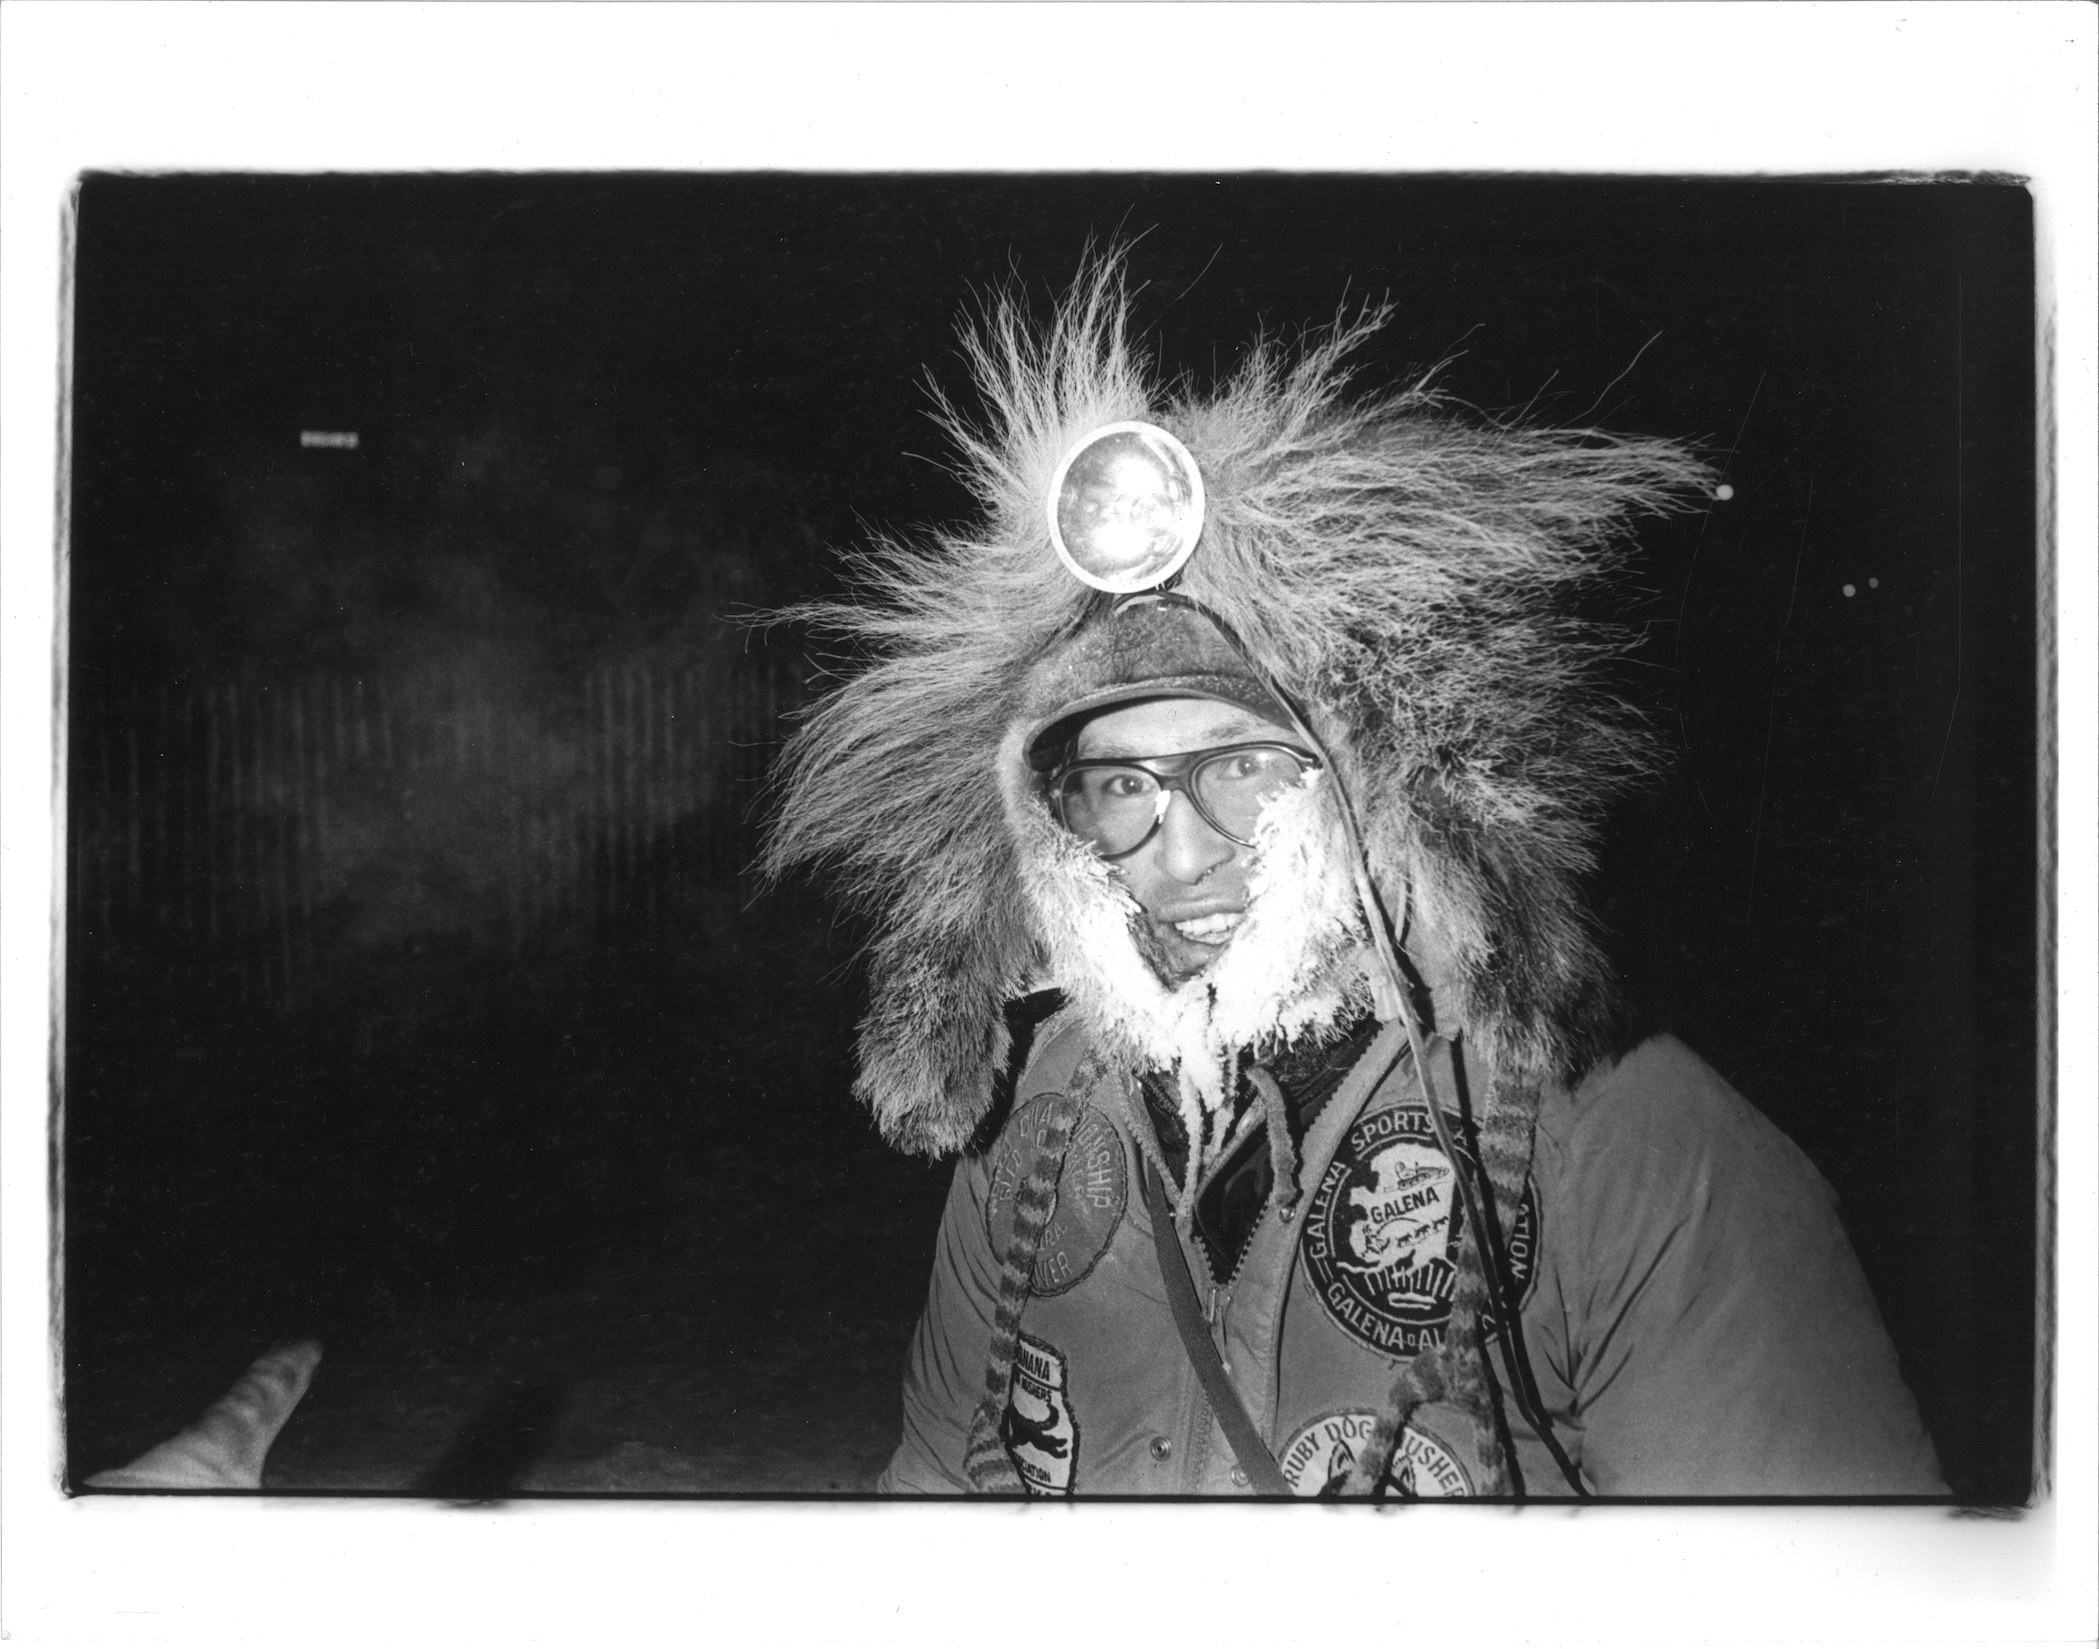 Man with big headlamp and hood covered in fur arrayed wildly, smiles at the camera in this black and white image.